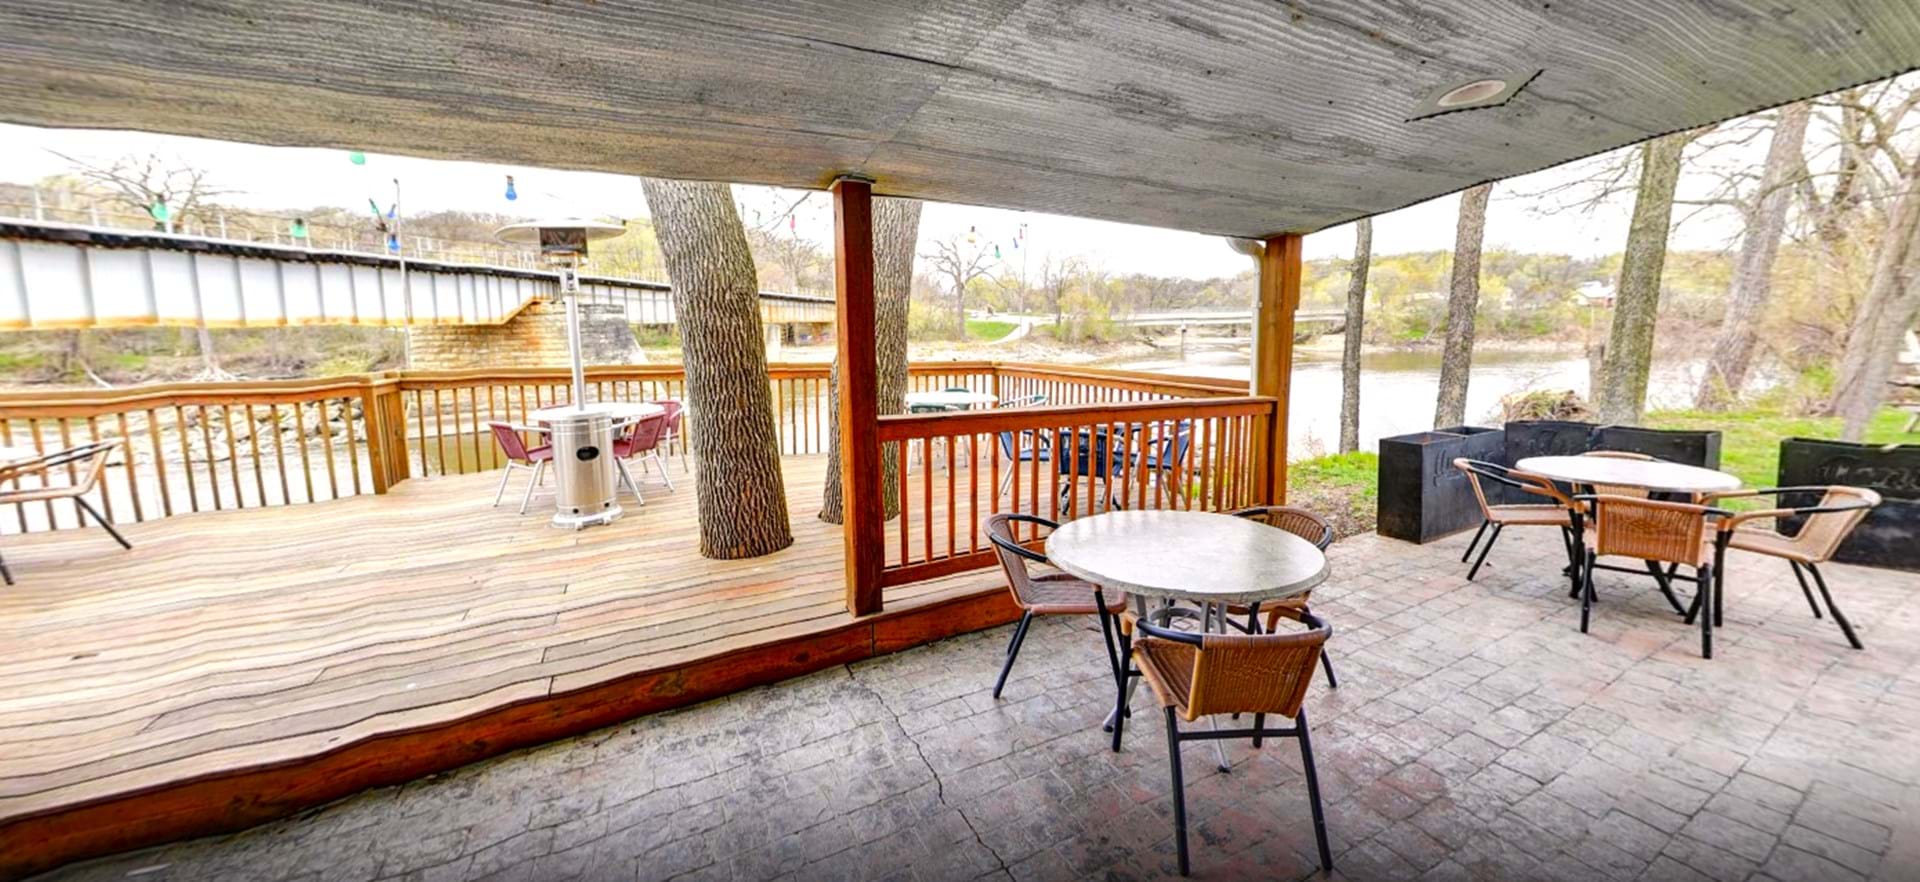 Patio and deck seating with views of the river give a casual, relaxing vibe.